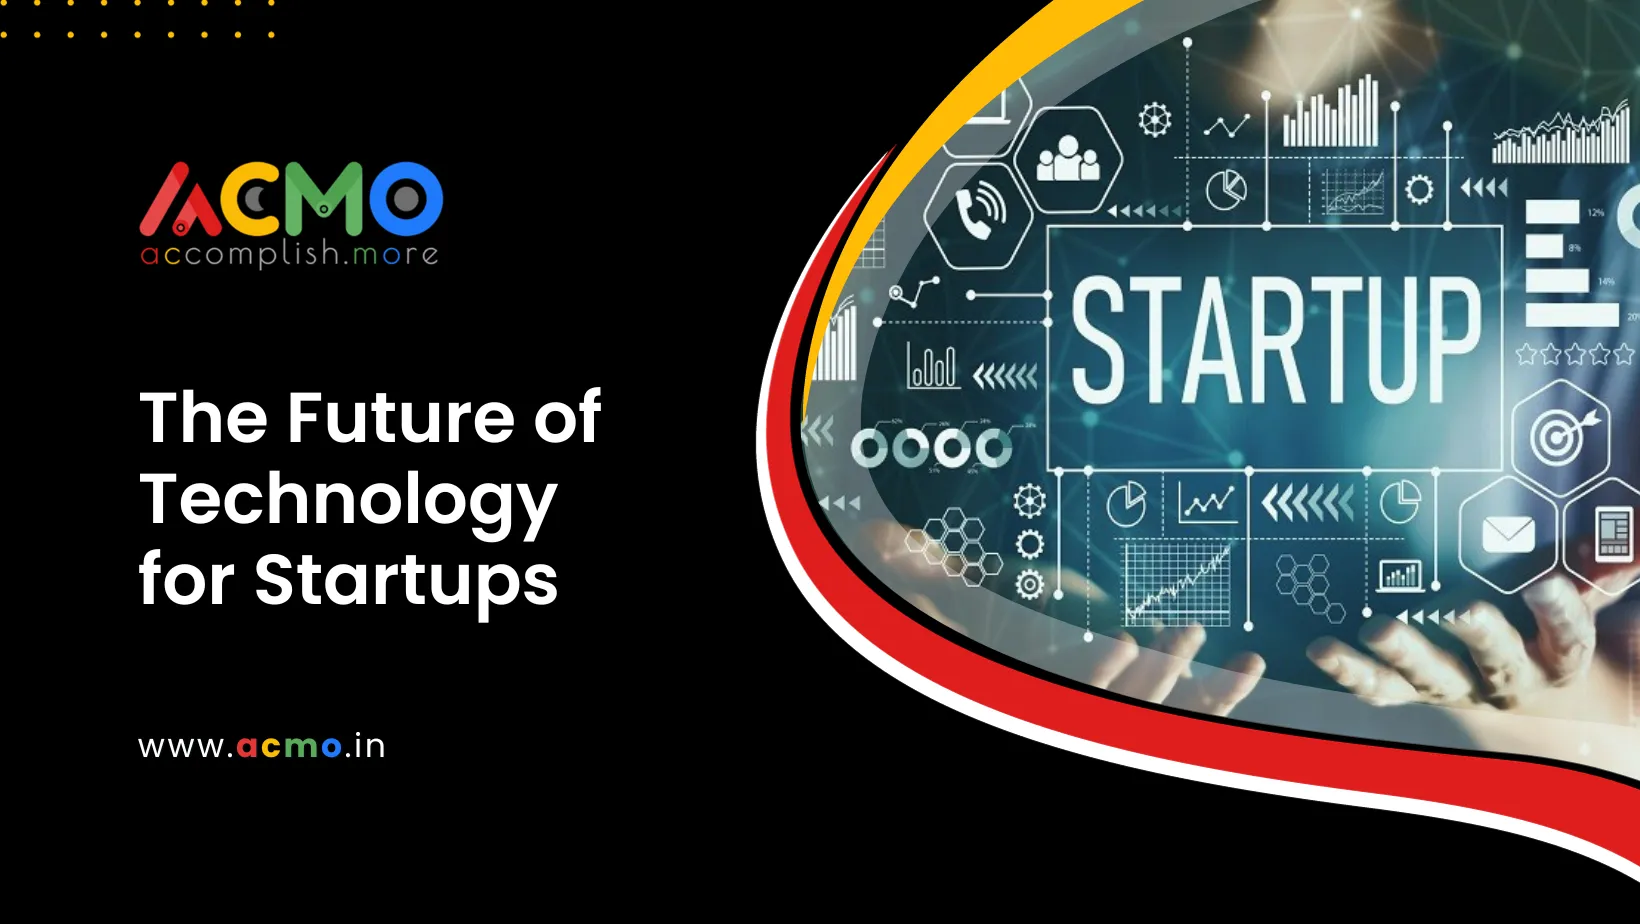 The Future of Technology for Startups